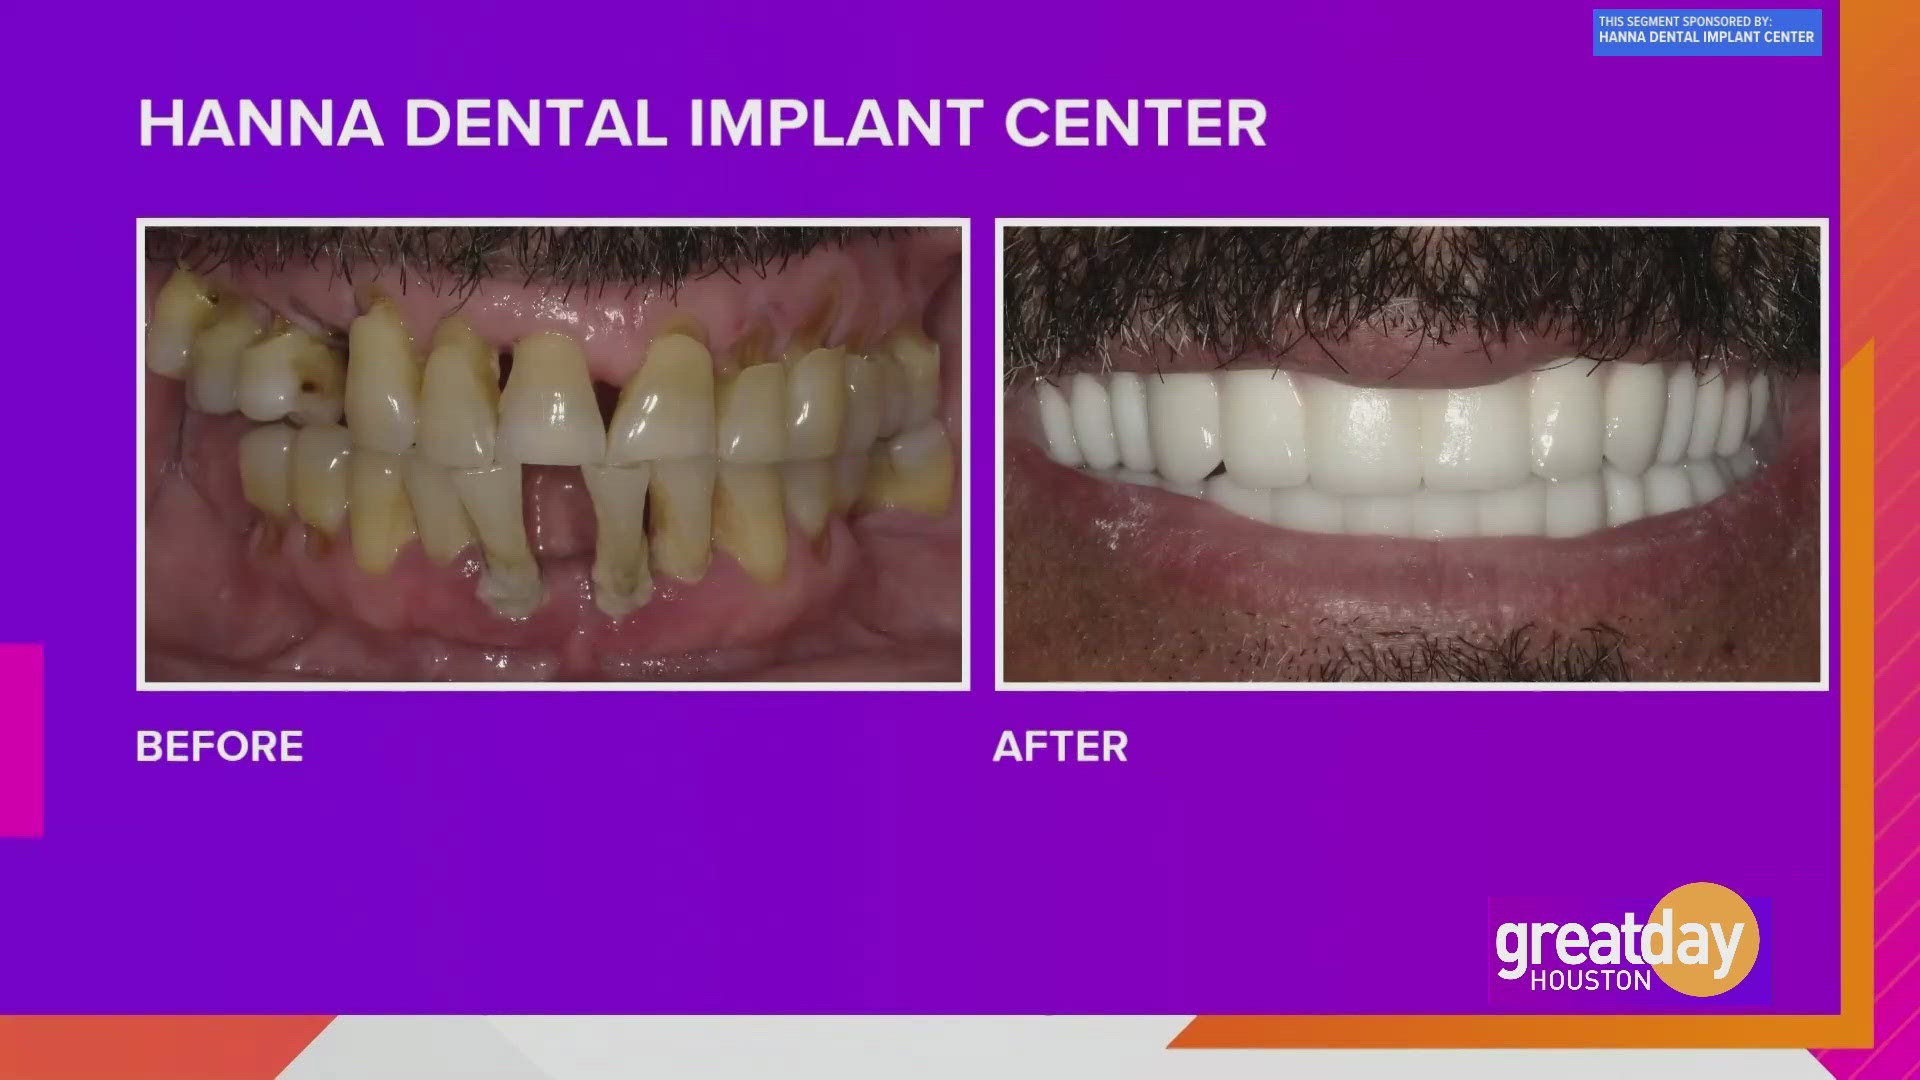 Dr. Raouf Hanna offers full mouth makeovers for permanent solutions